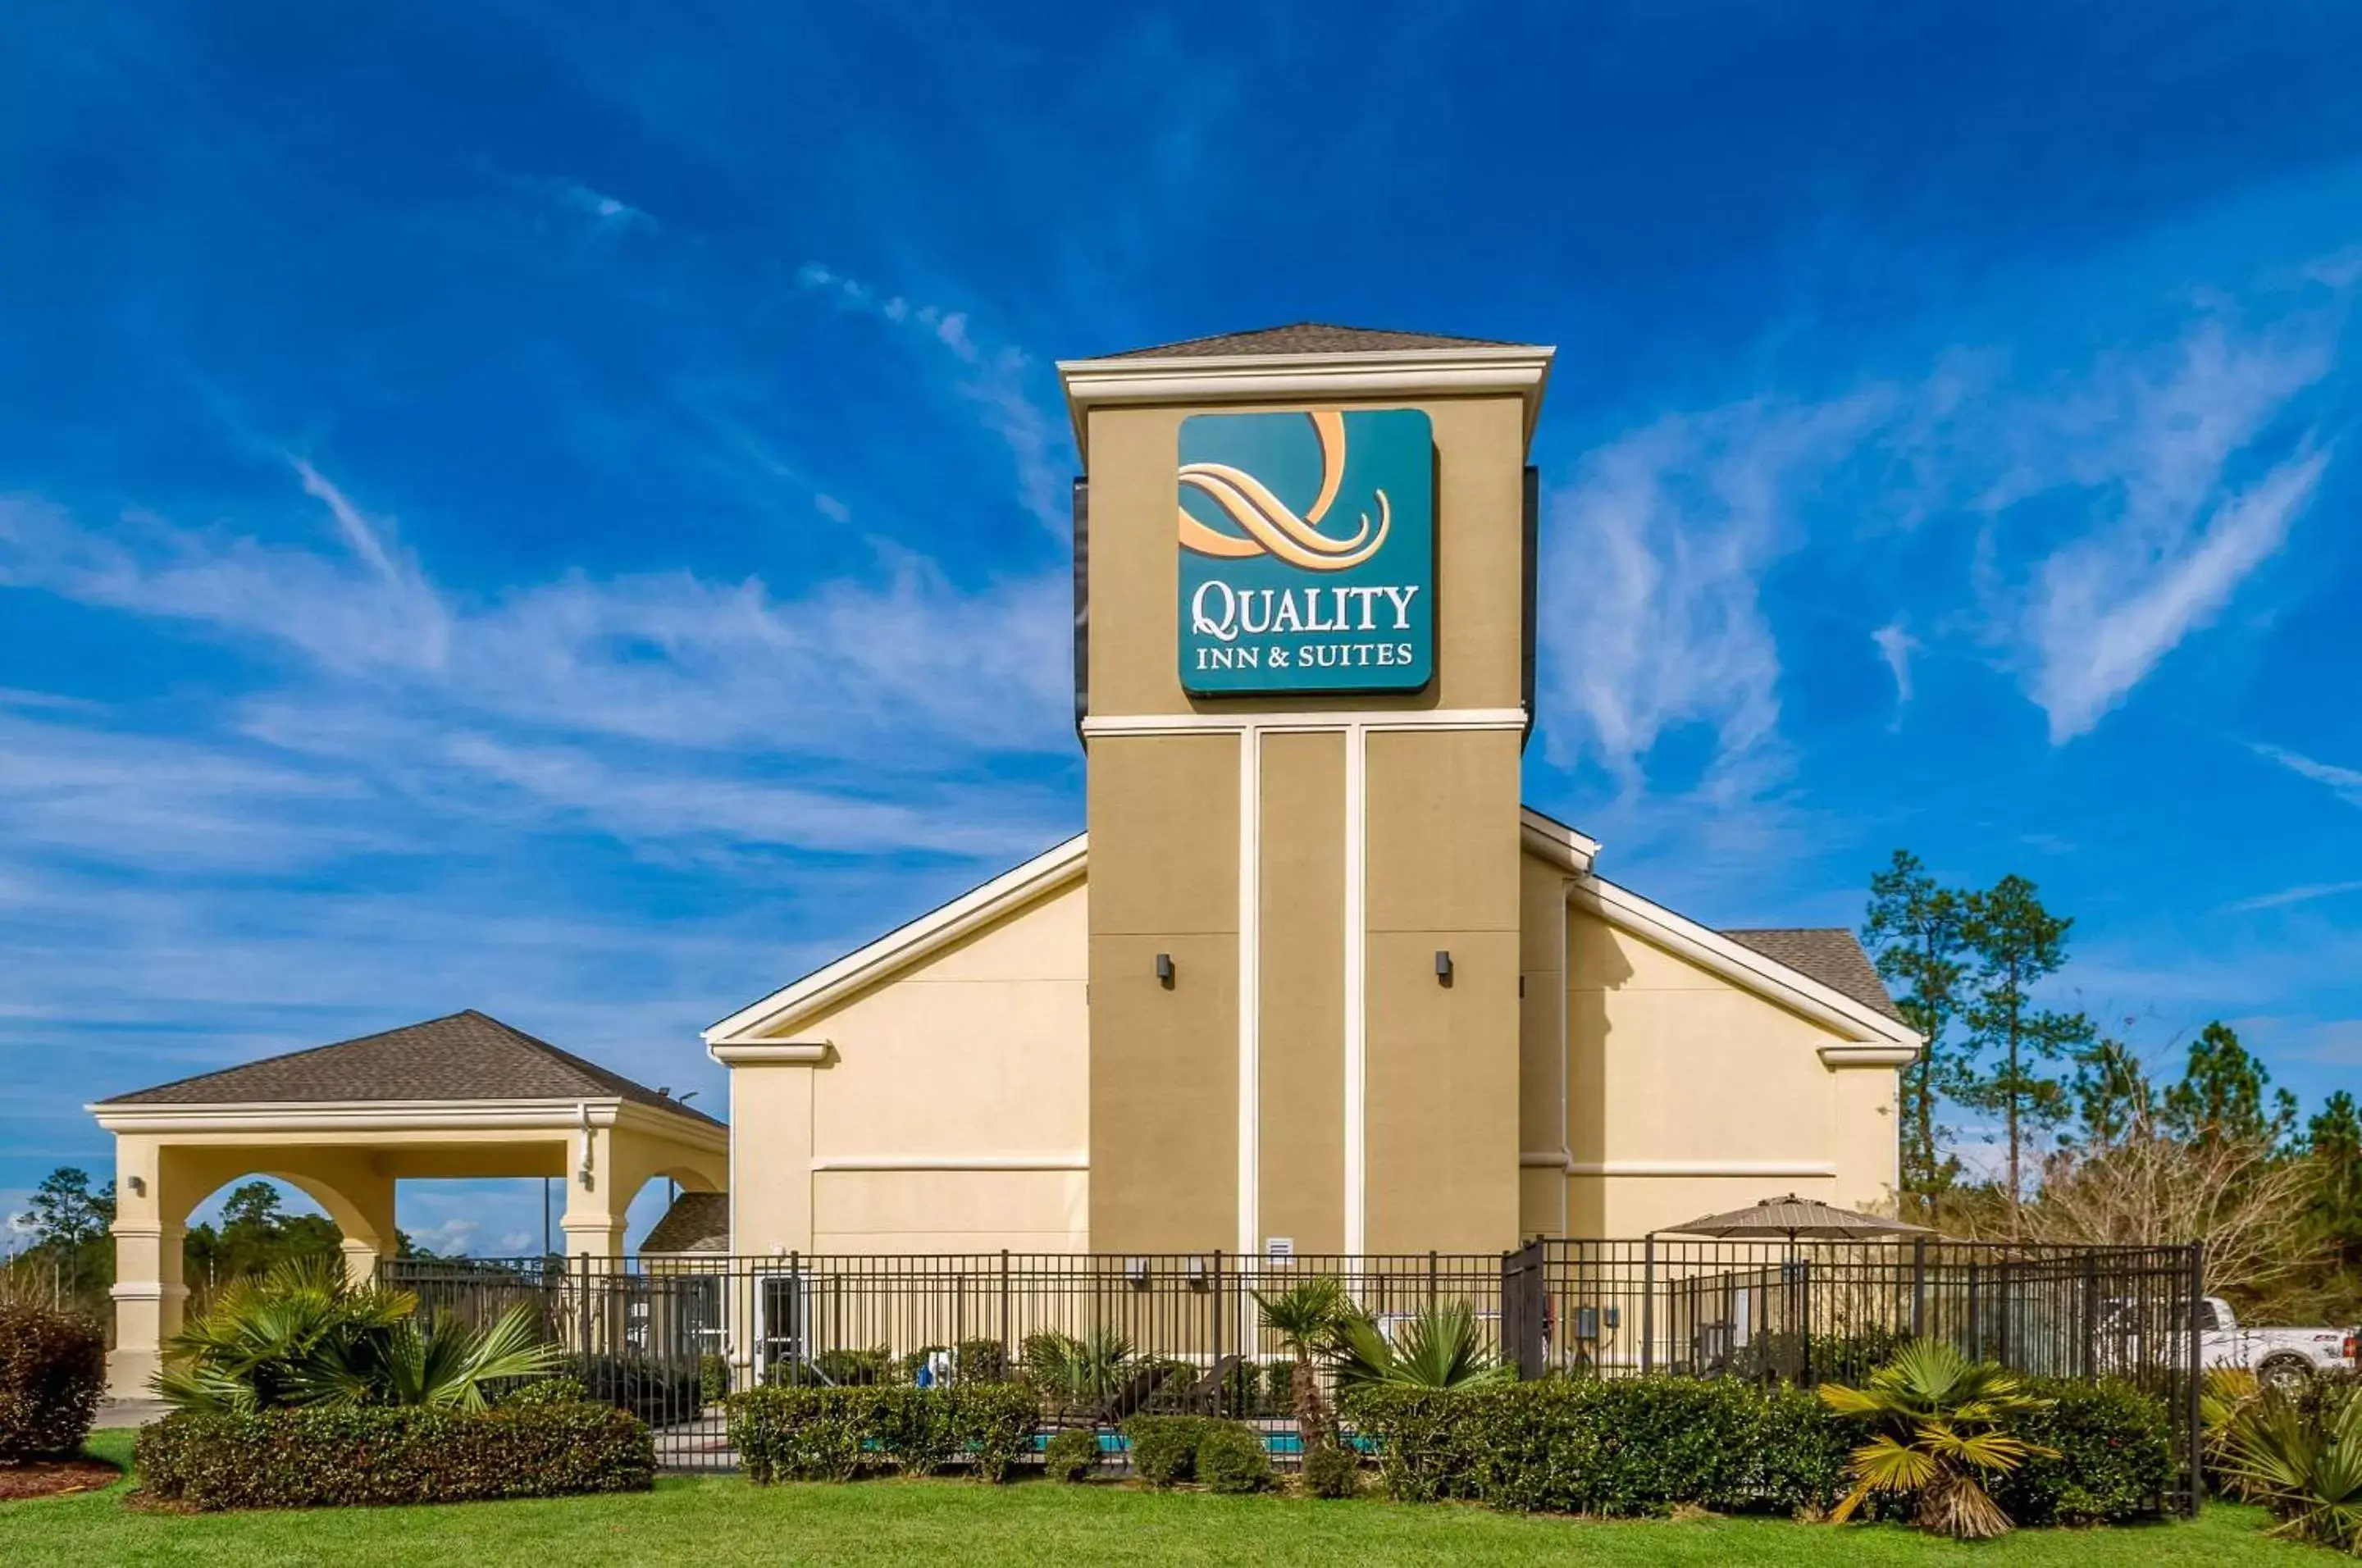 Property Building in Quality Inn & Suites Slidell